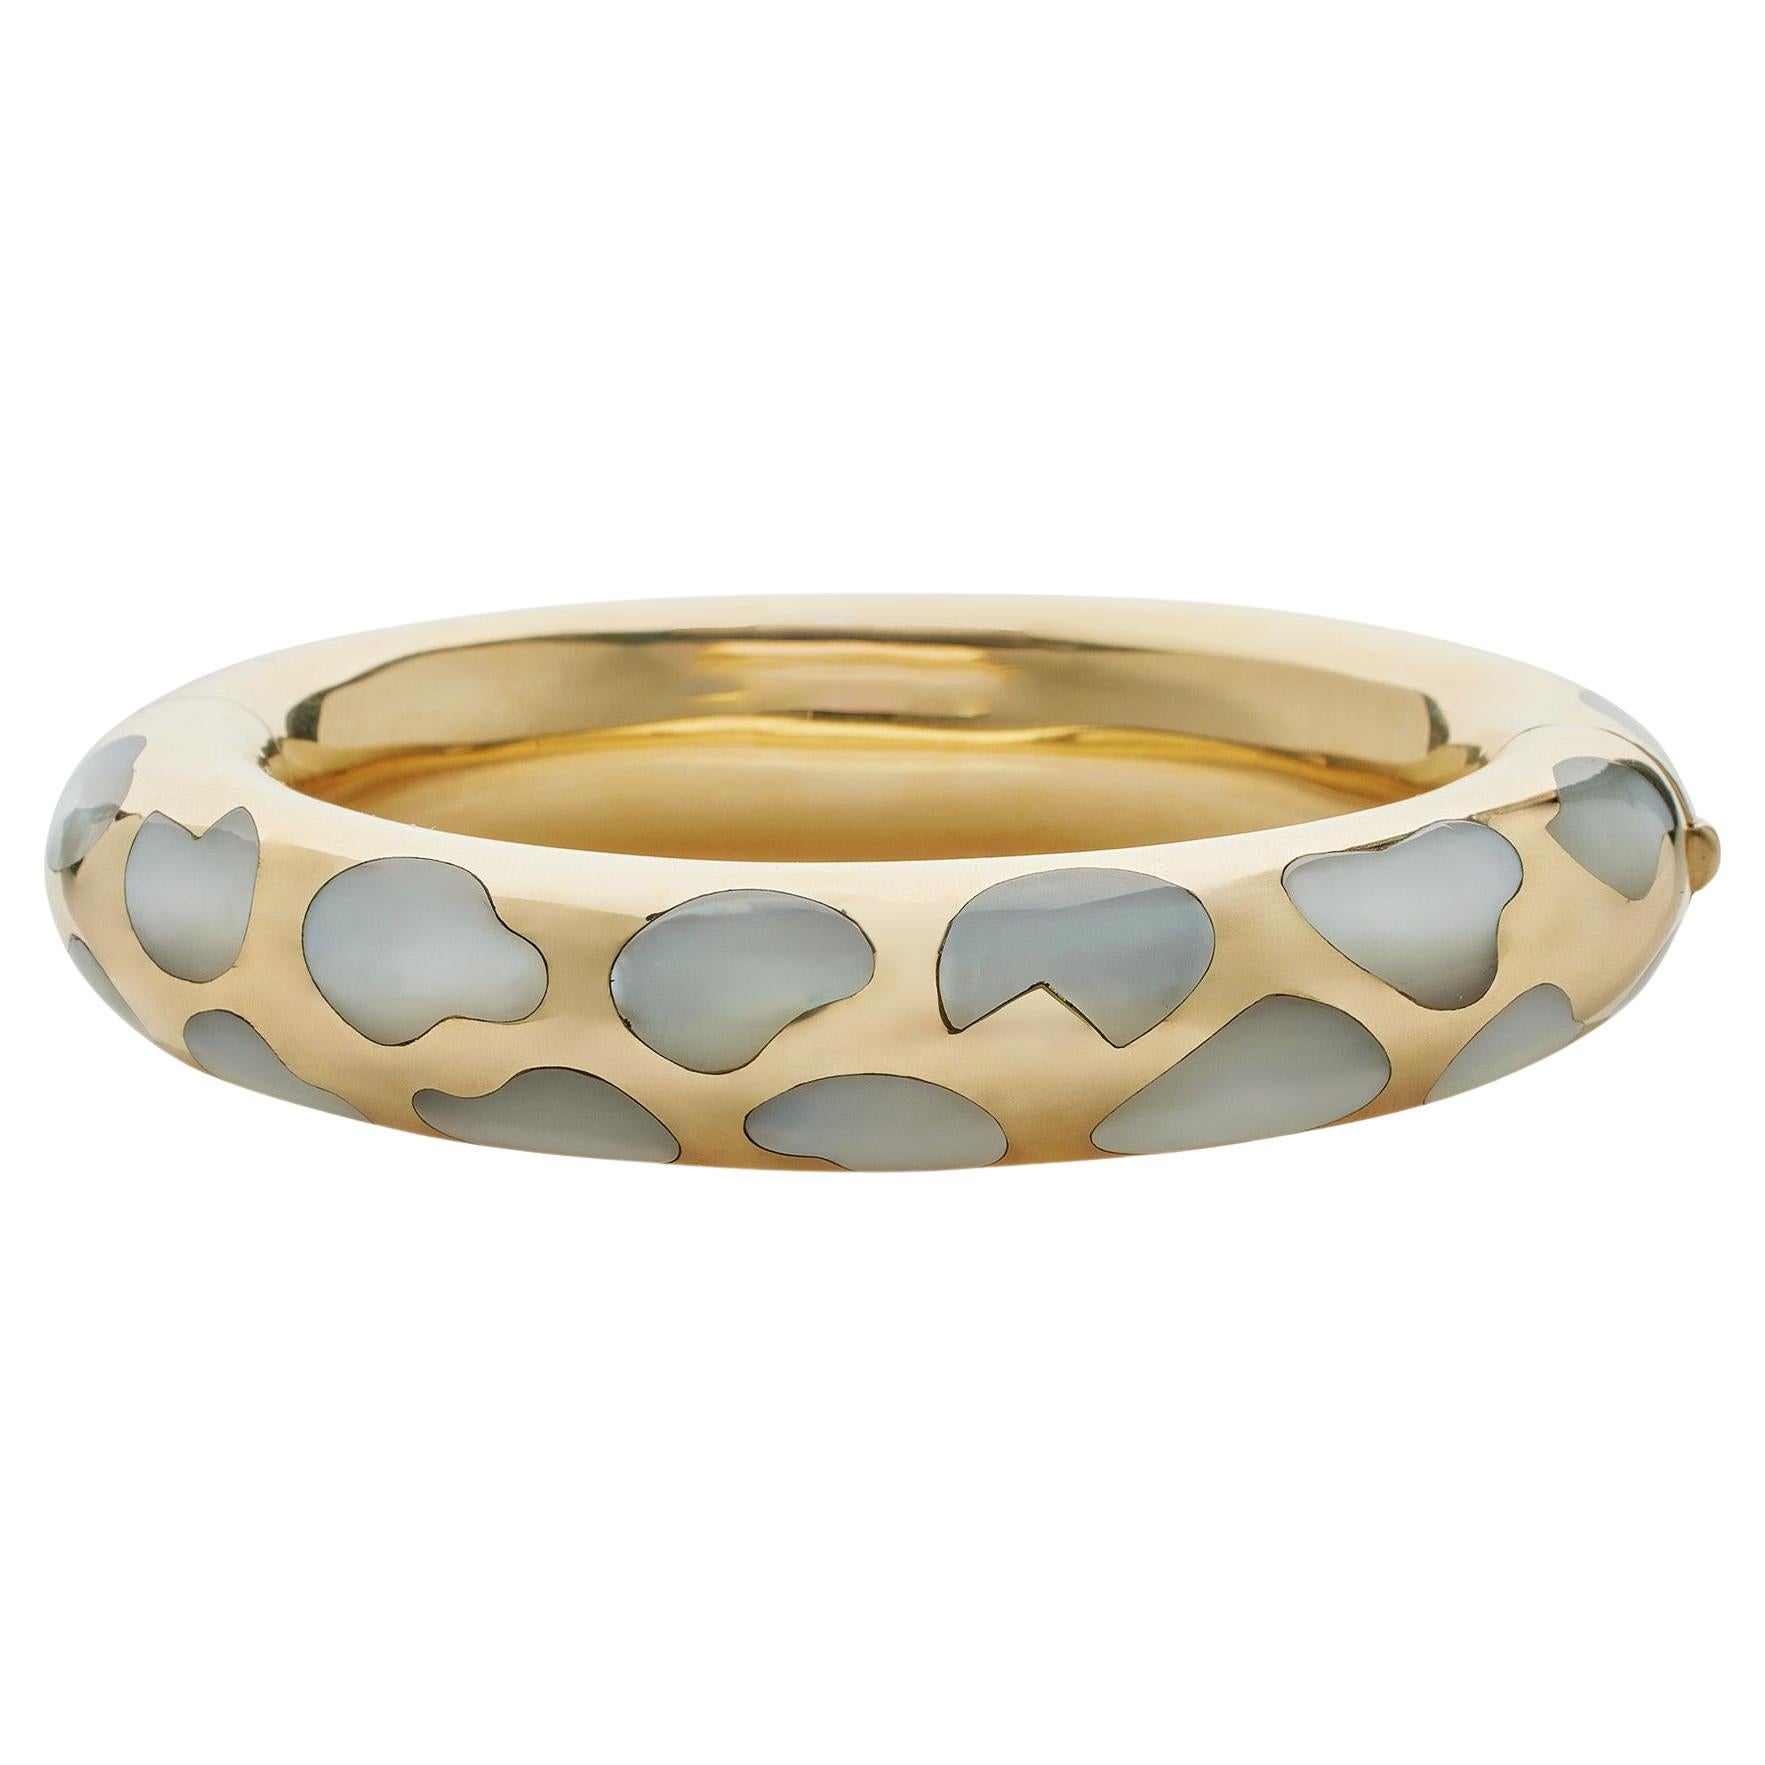 Angela Cummings Tiffany & Co. Mother-of-Pearl and 18K Gold Bangle Bracelet